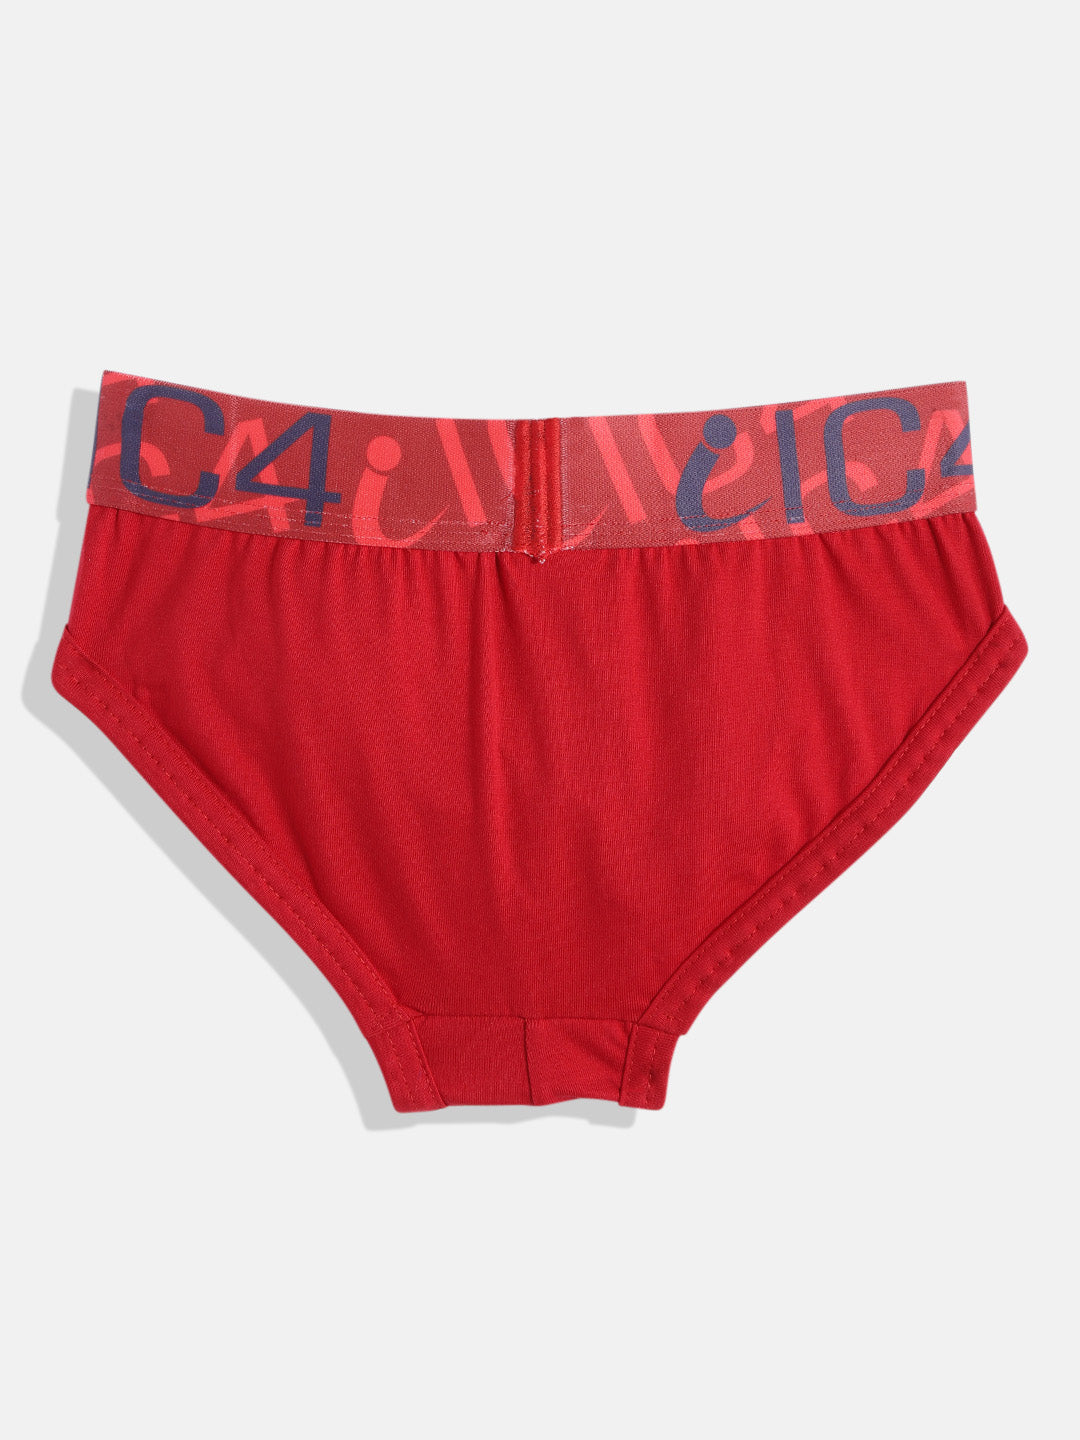 IC4 Boys Fashion Brief Combo Pack of 2 Red